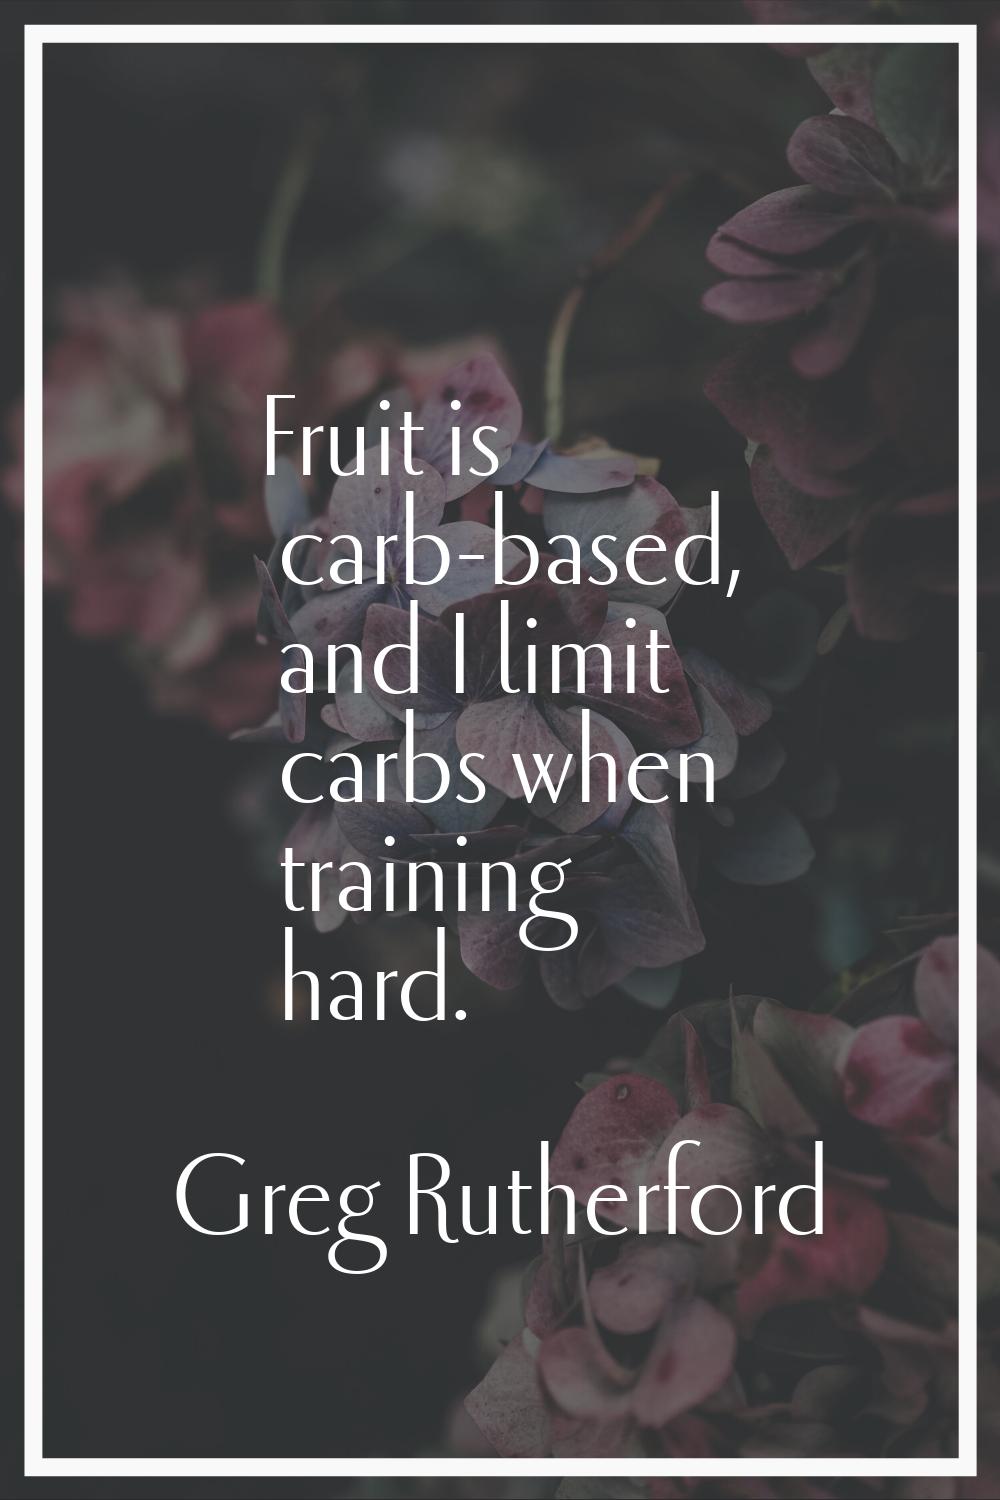 Fruit is carb-based, and I limit carbs when training hard.